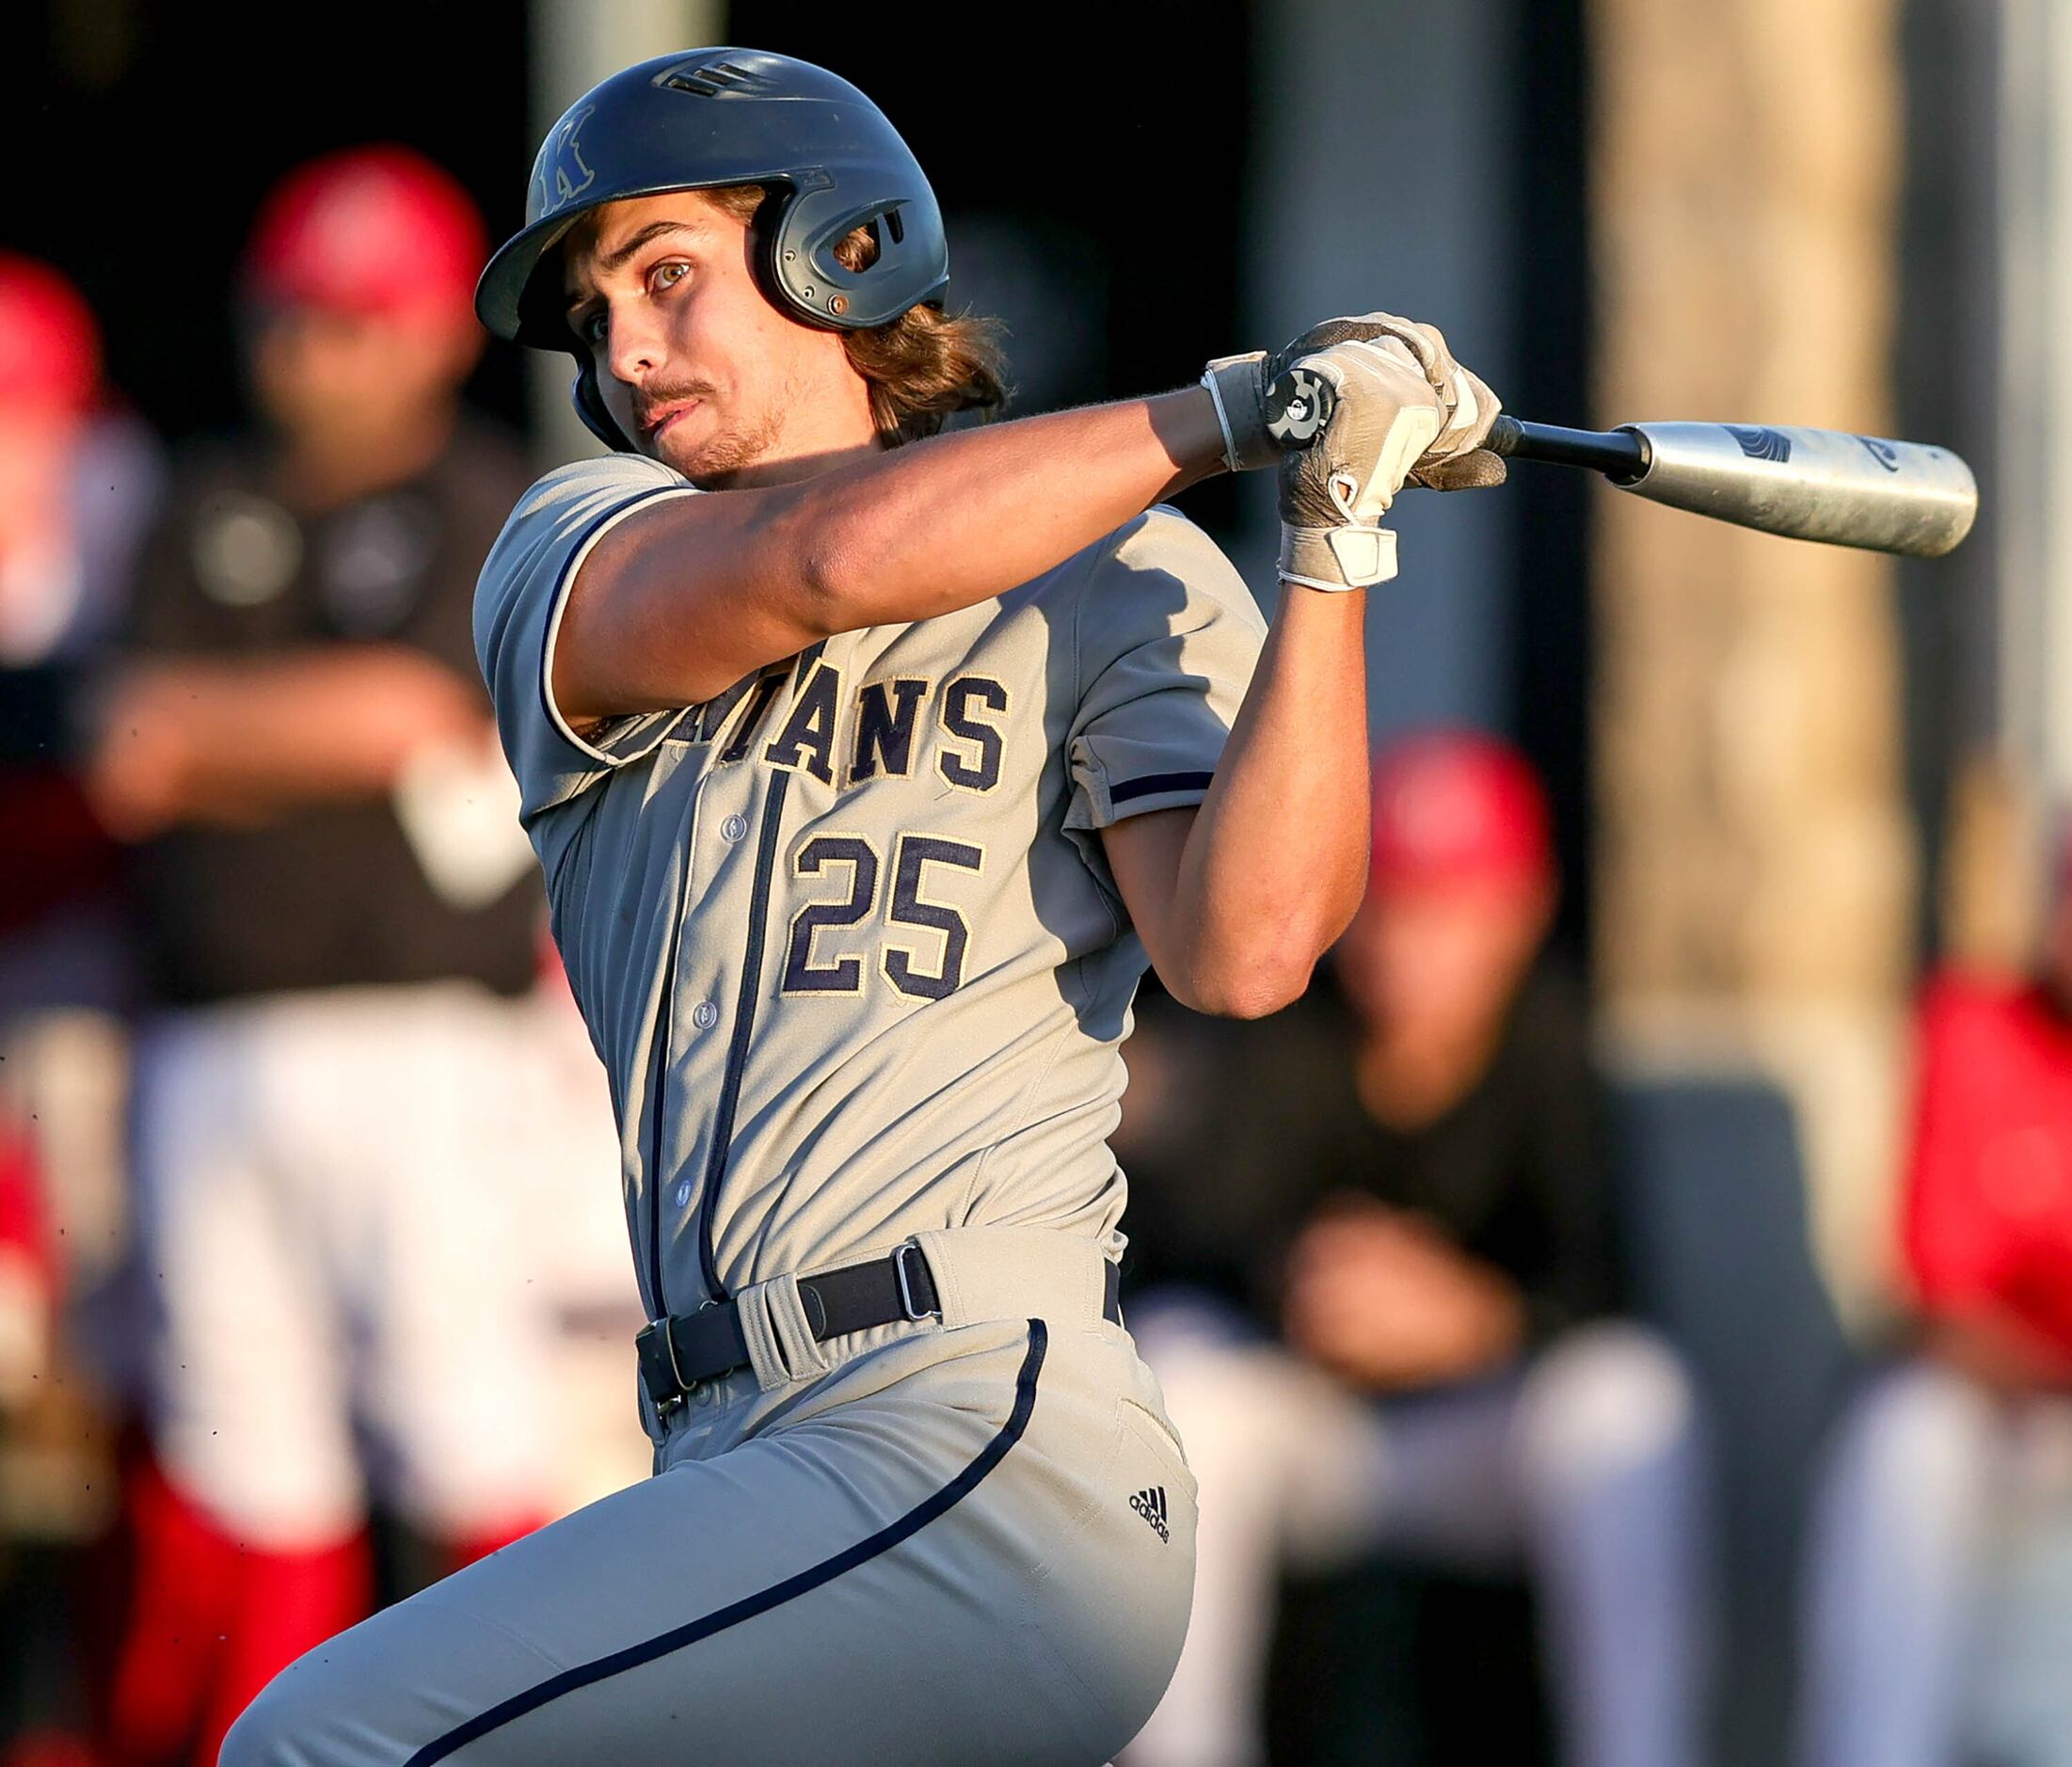 Keller DH Niko Pecskovszky takes a big swing against Flower Mound Marcus during game 1 of...